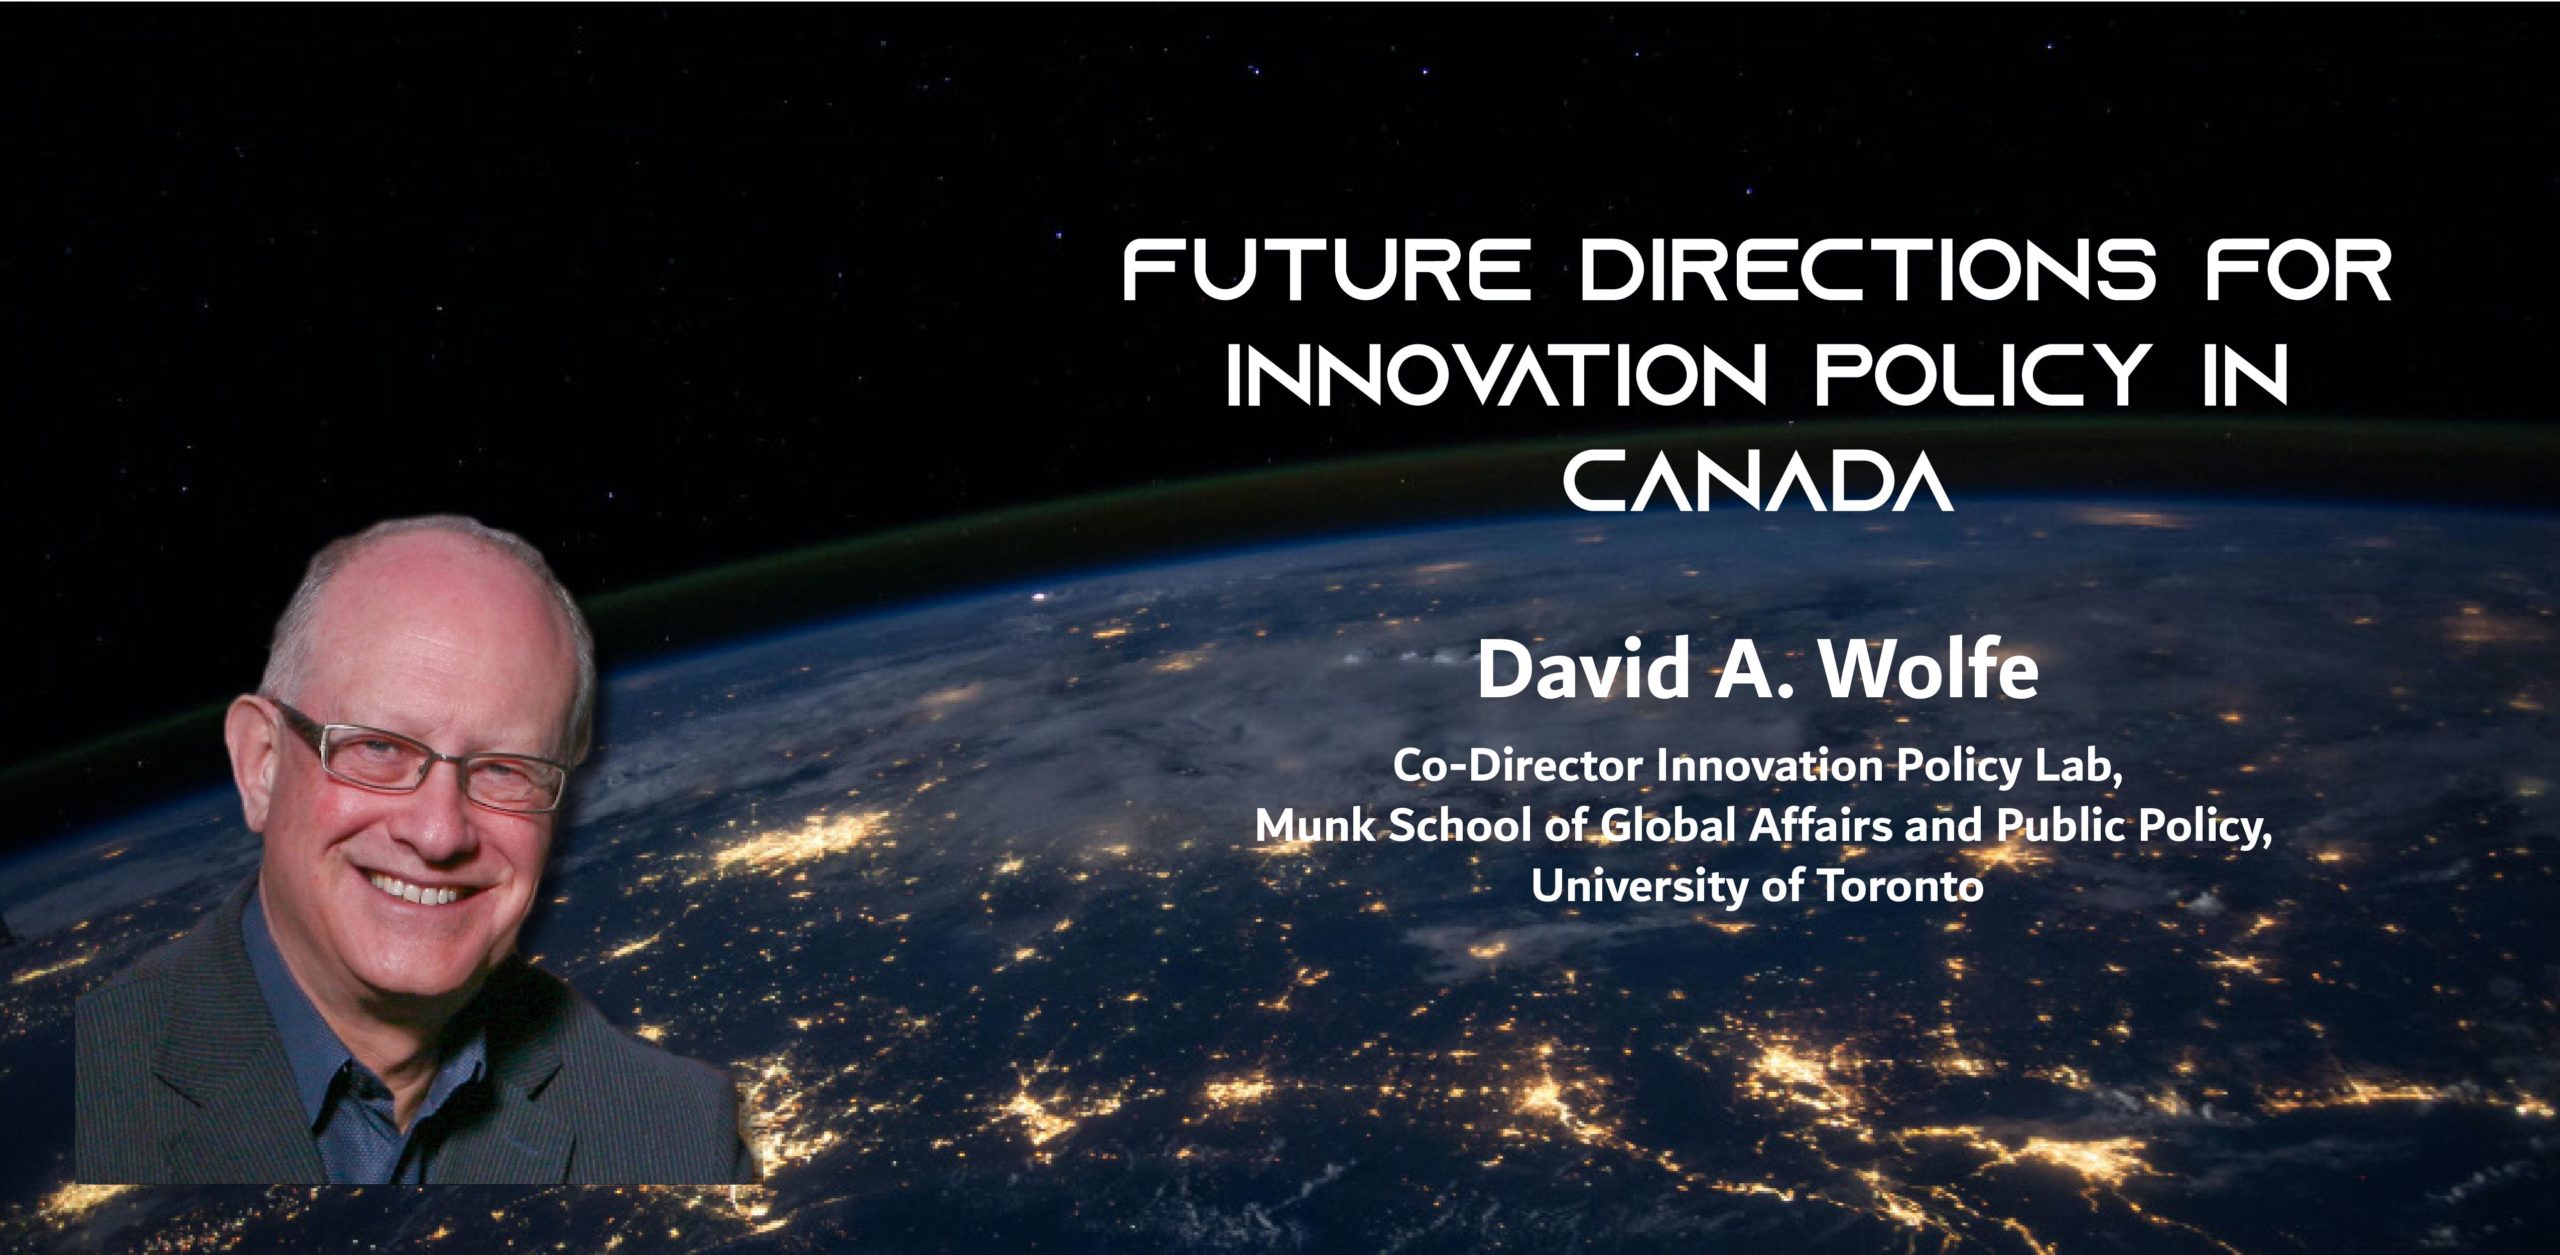 A picture of a man against the globe at night, with the text: Future Directions for Innovation Policy in Canada David A. Wolfe Co-Director Innovation Policy Lab, Munk School of Global Affairs and Public Policy, University of Toronto